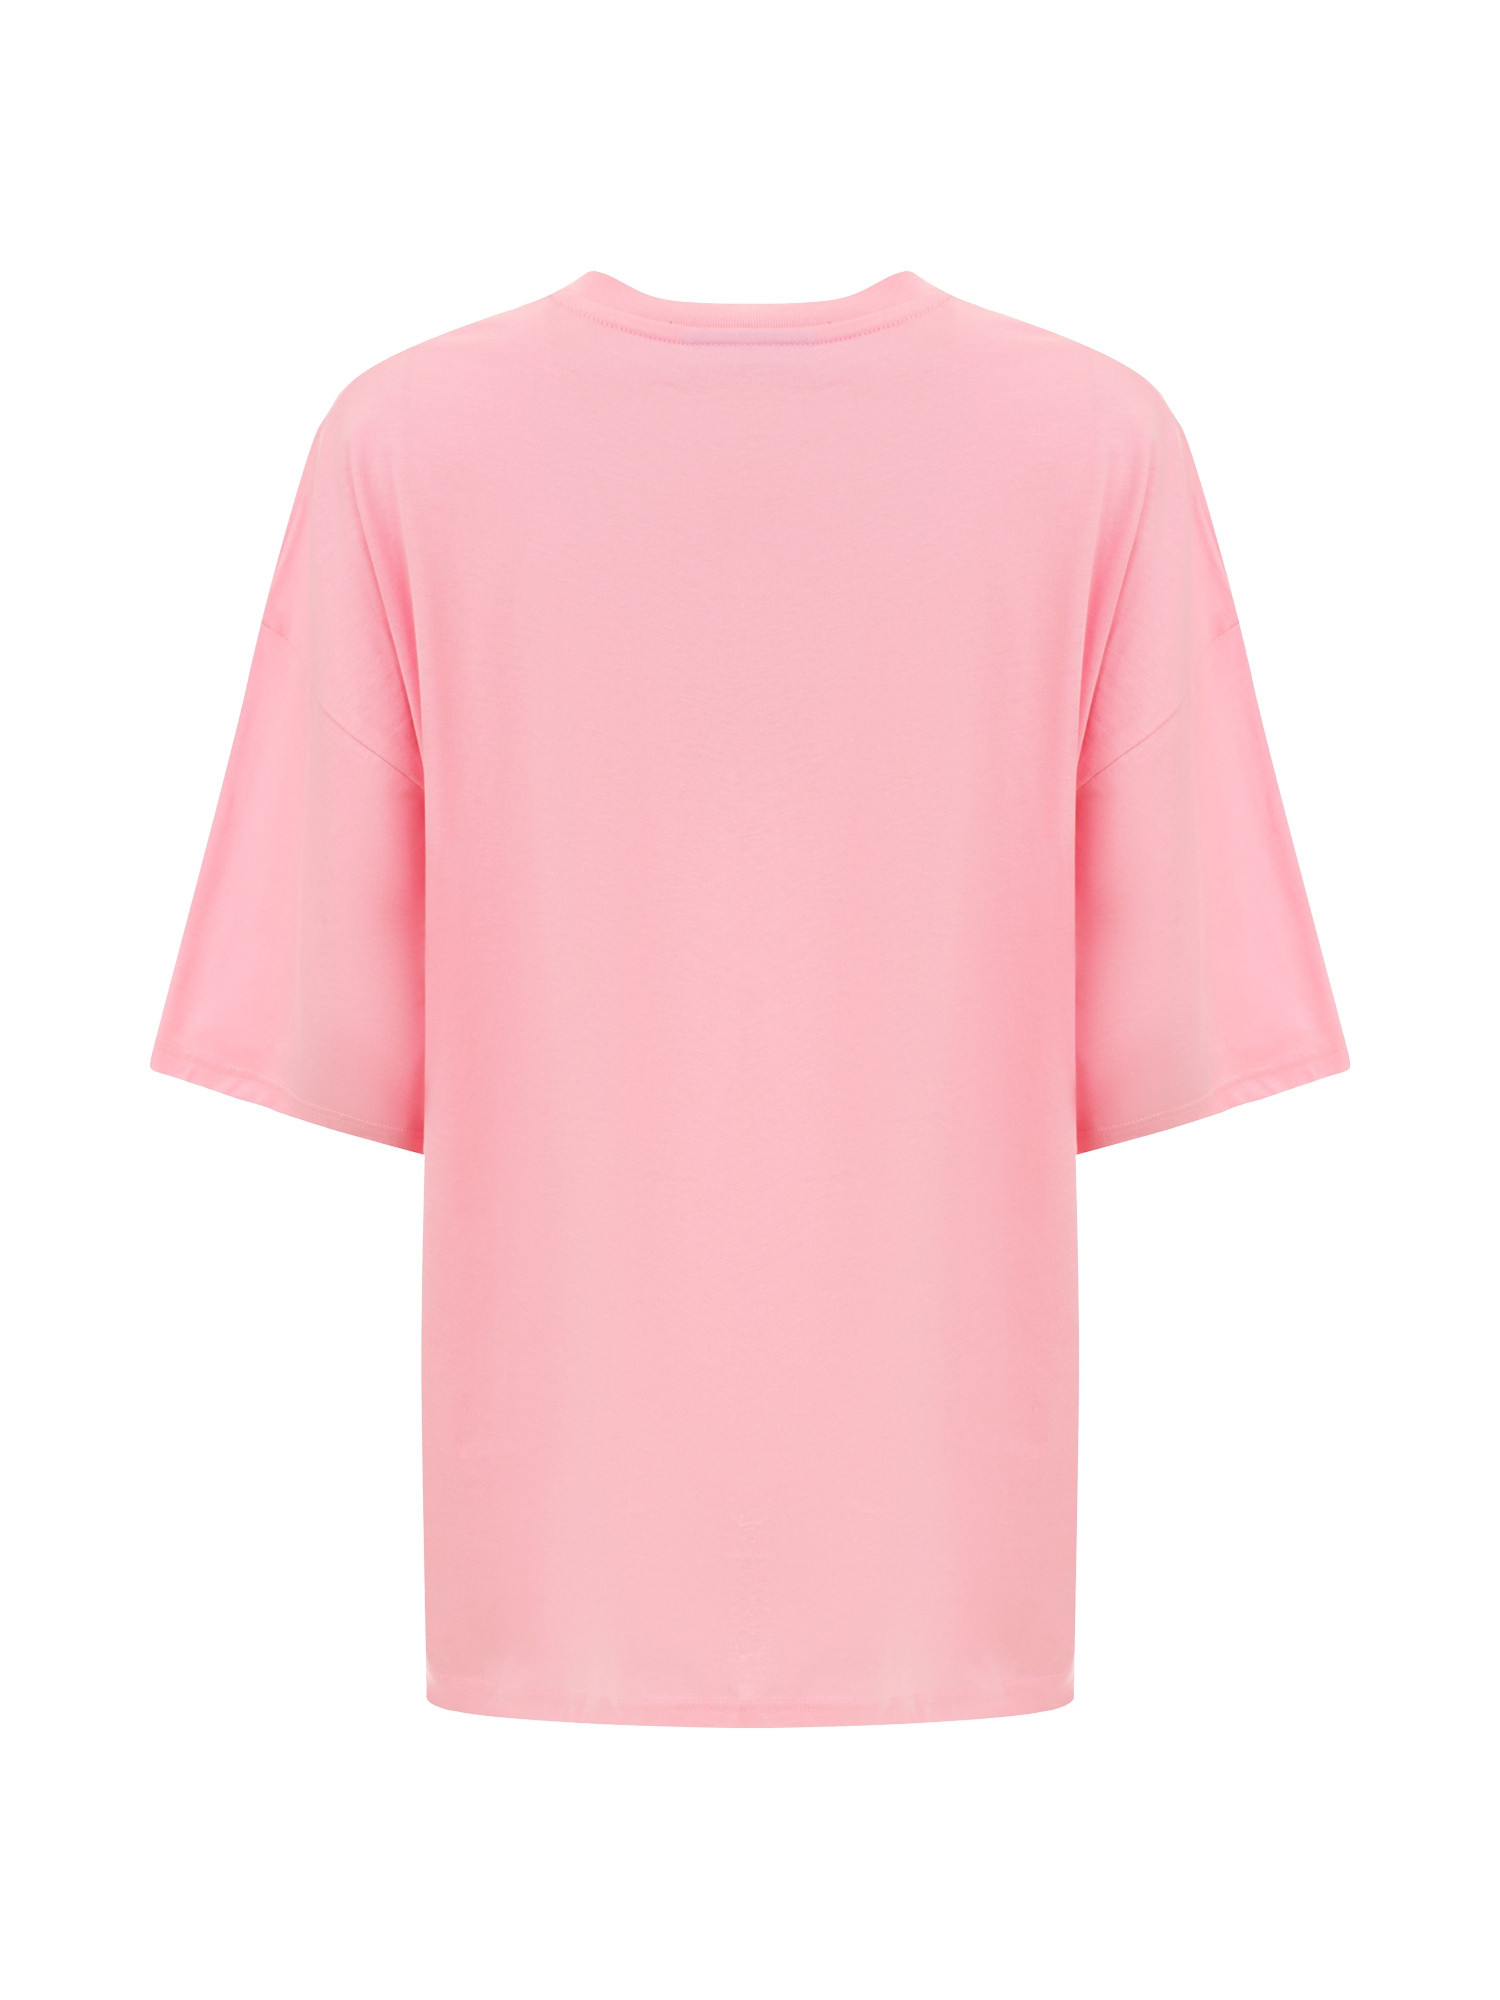 Chiara Ferragni - Over fit T-shirt with embroidered logo, Pink, large image number 1